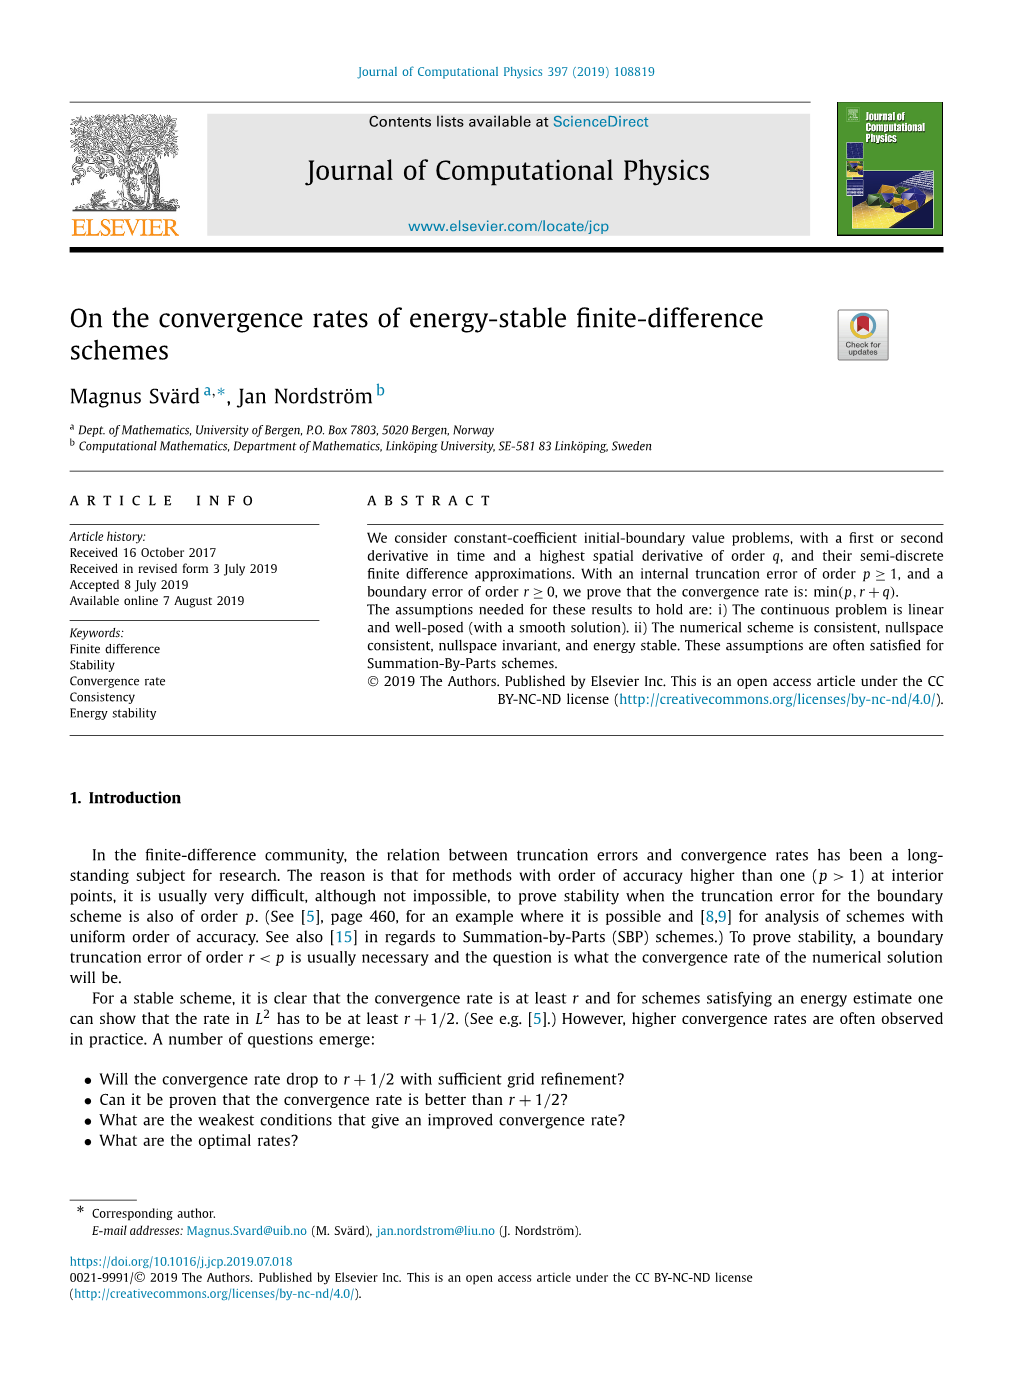 On the Convergence Rates of Energy-Stable Finite-Difference